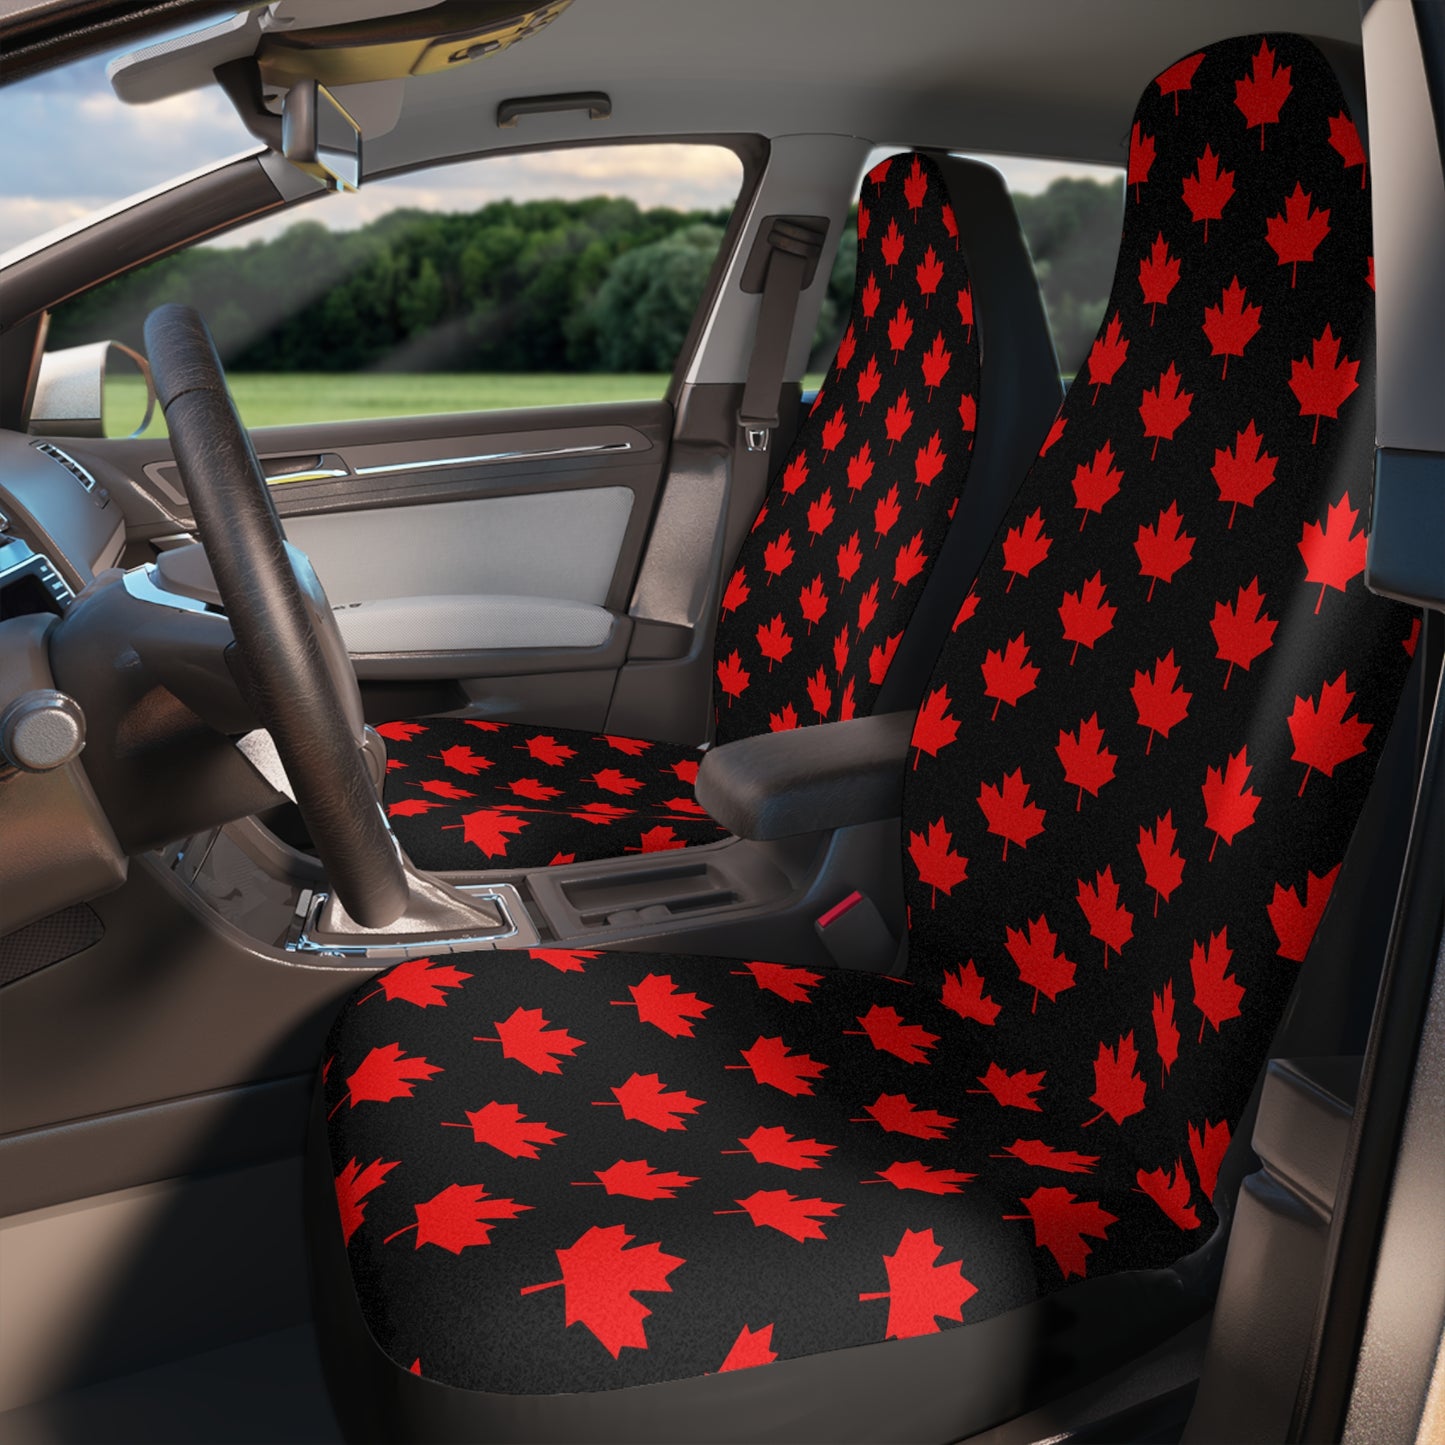 Car Seat Covers, Canadian Maple Leaf, Black